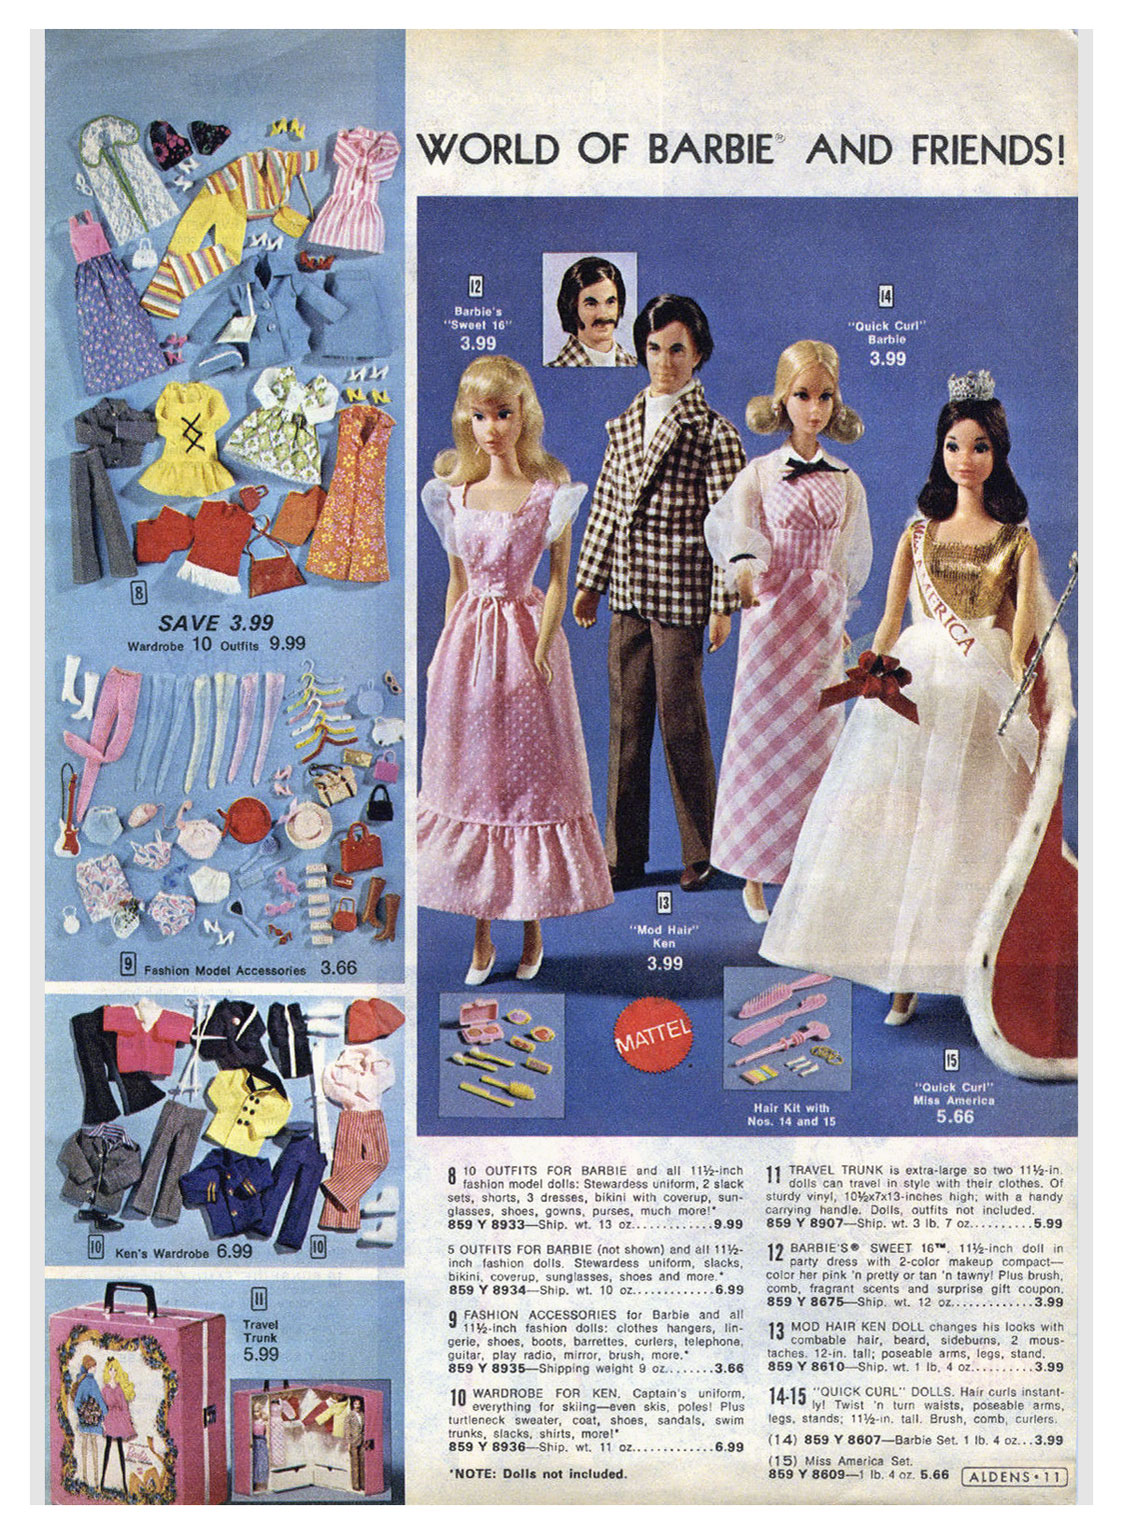 From 1974 Aldens Christmas catalogue